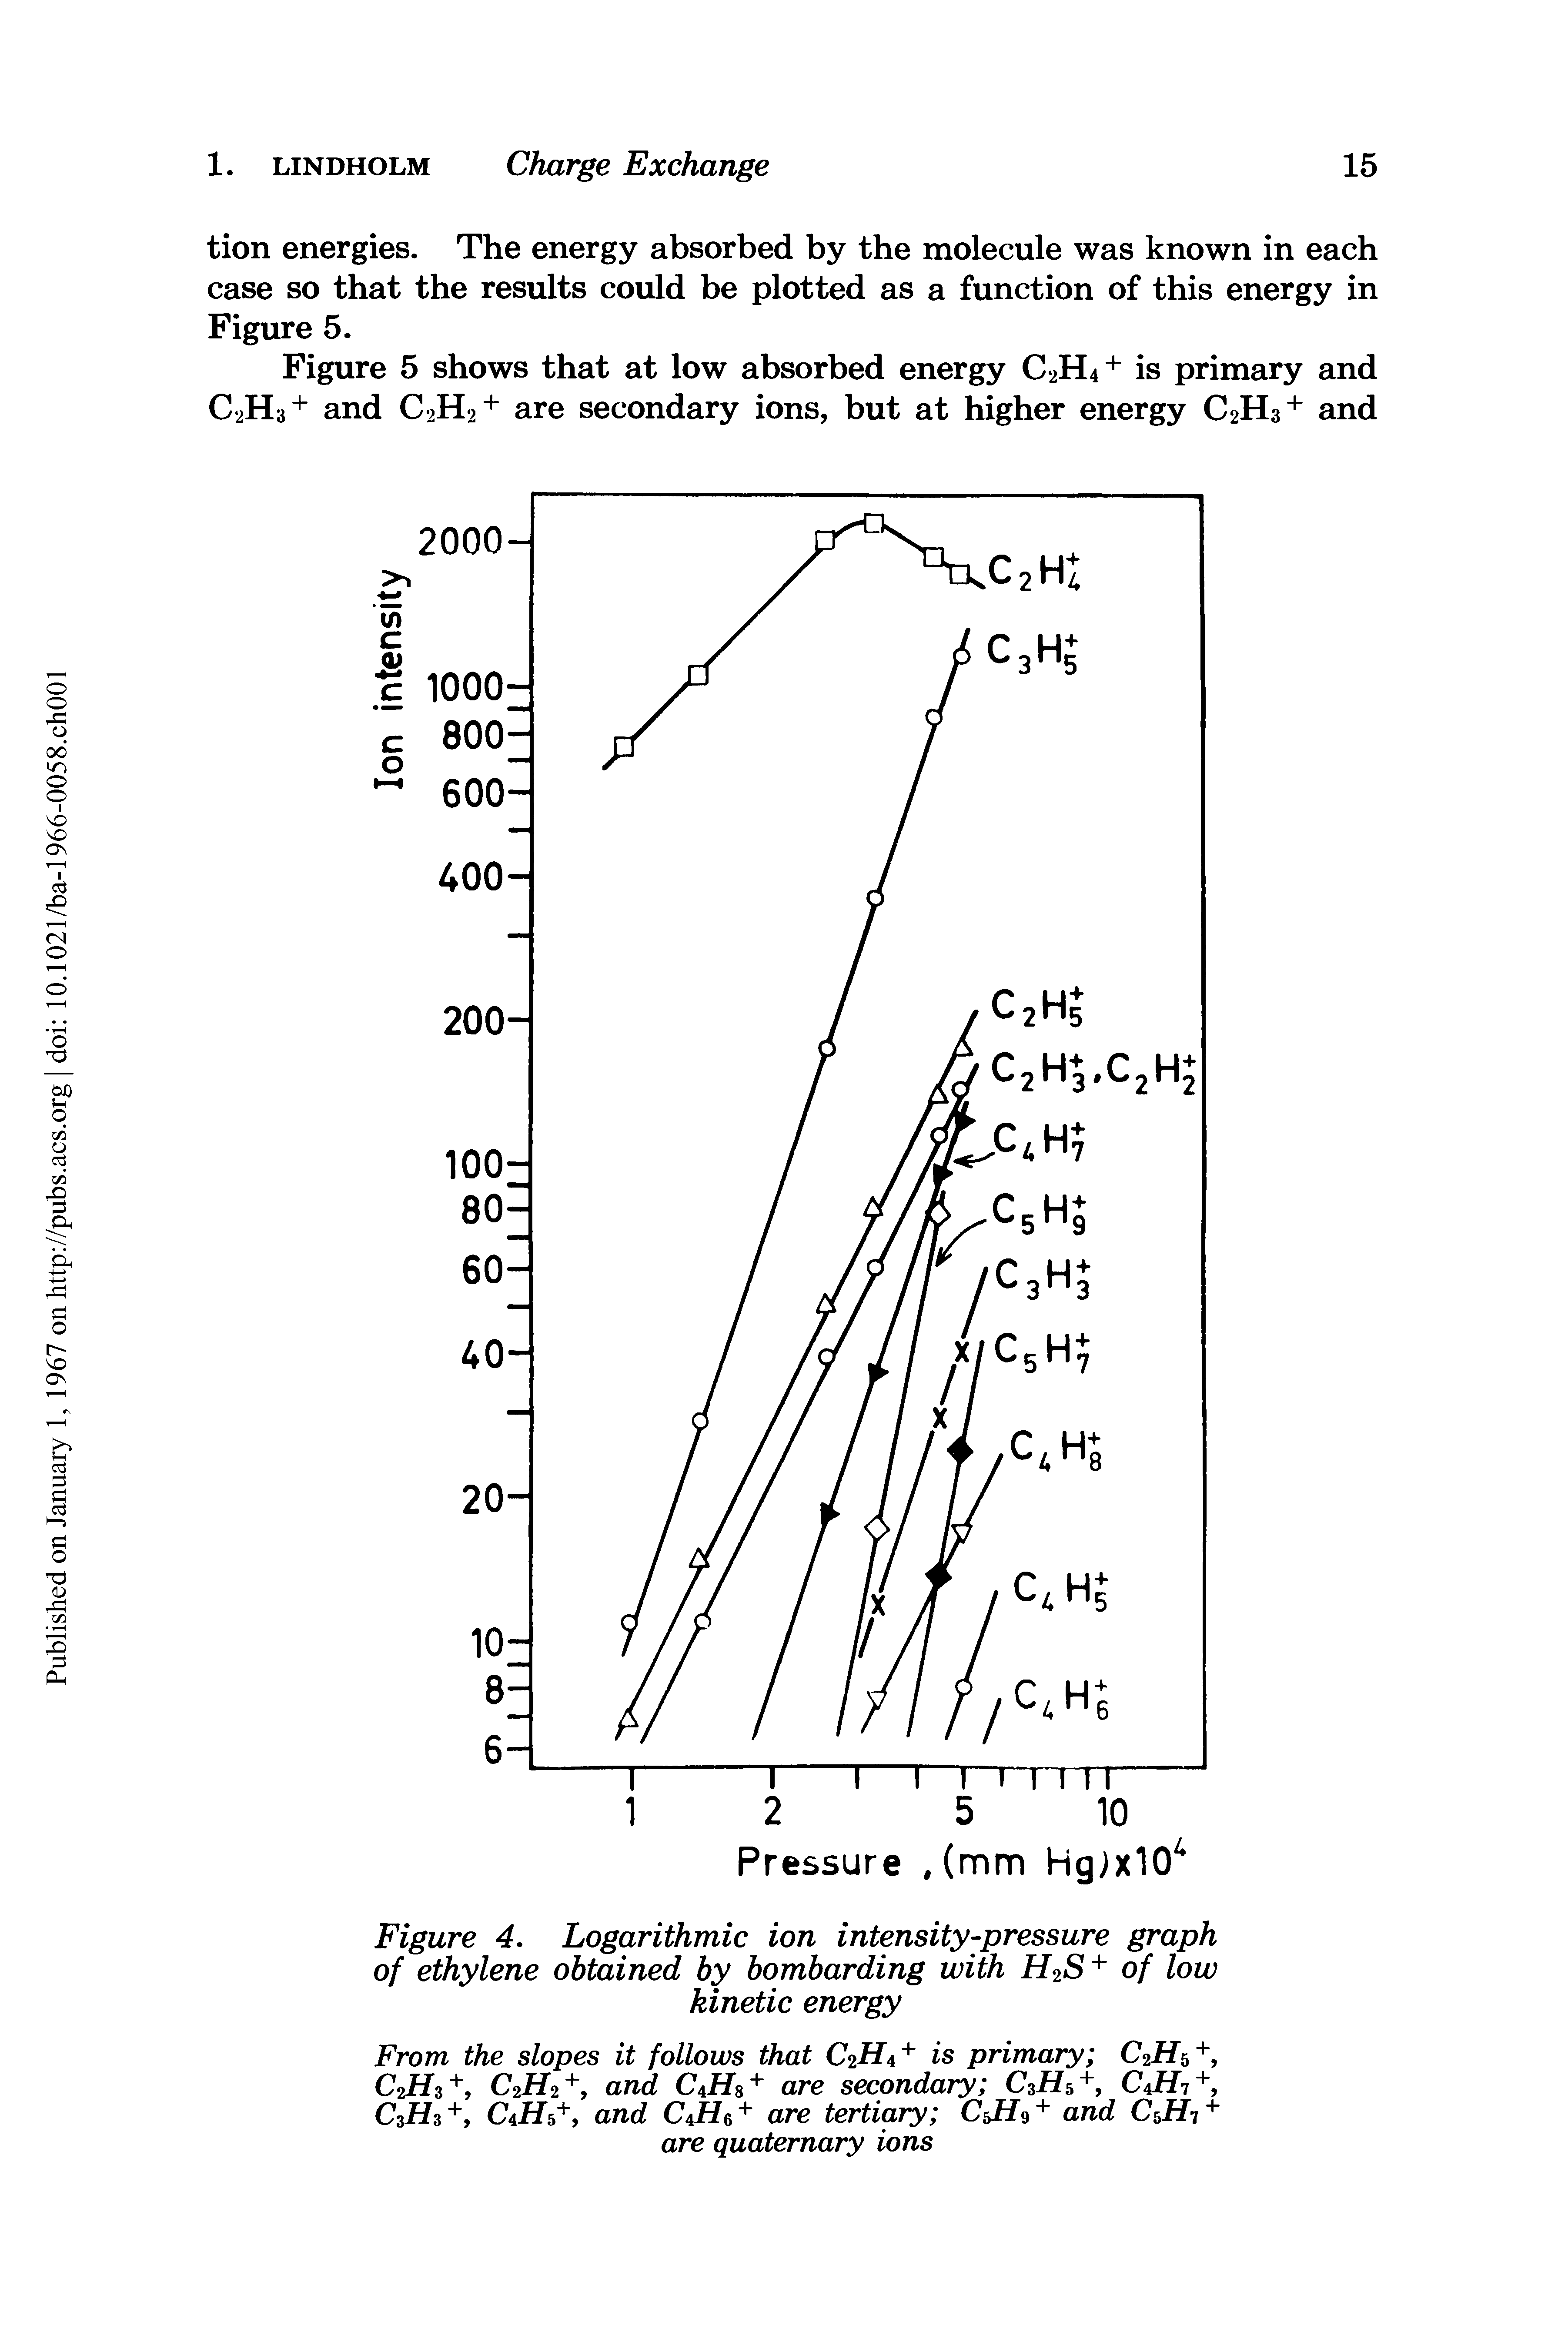 Figure 4. Logarithmic ion intensity-pressure graph of ethylene obtained by bombarding with H2S + of low kinetic energy...